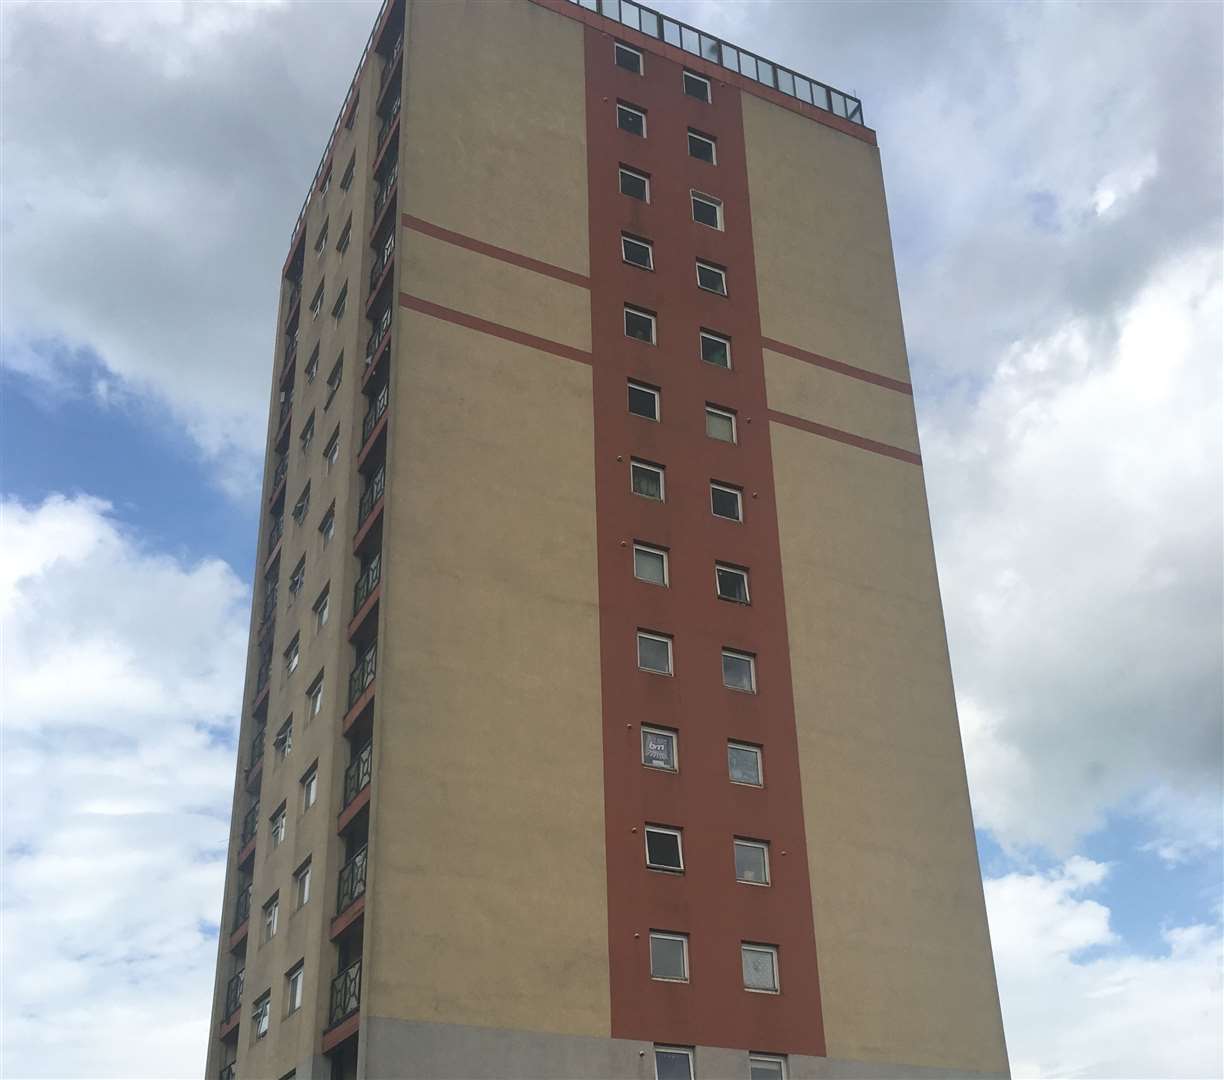 Fire crews were called to the blaze at Invicta House in Margate